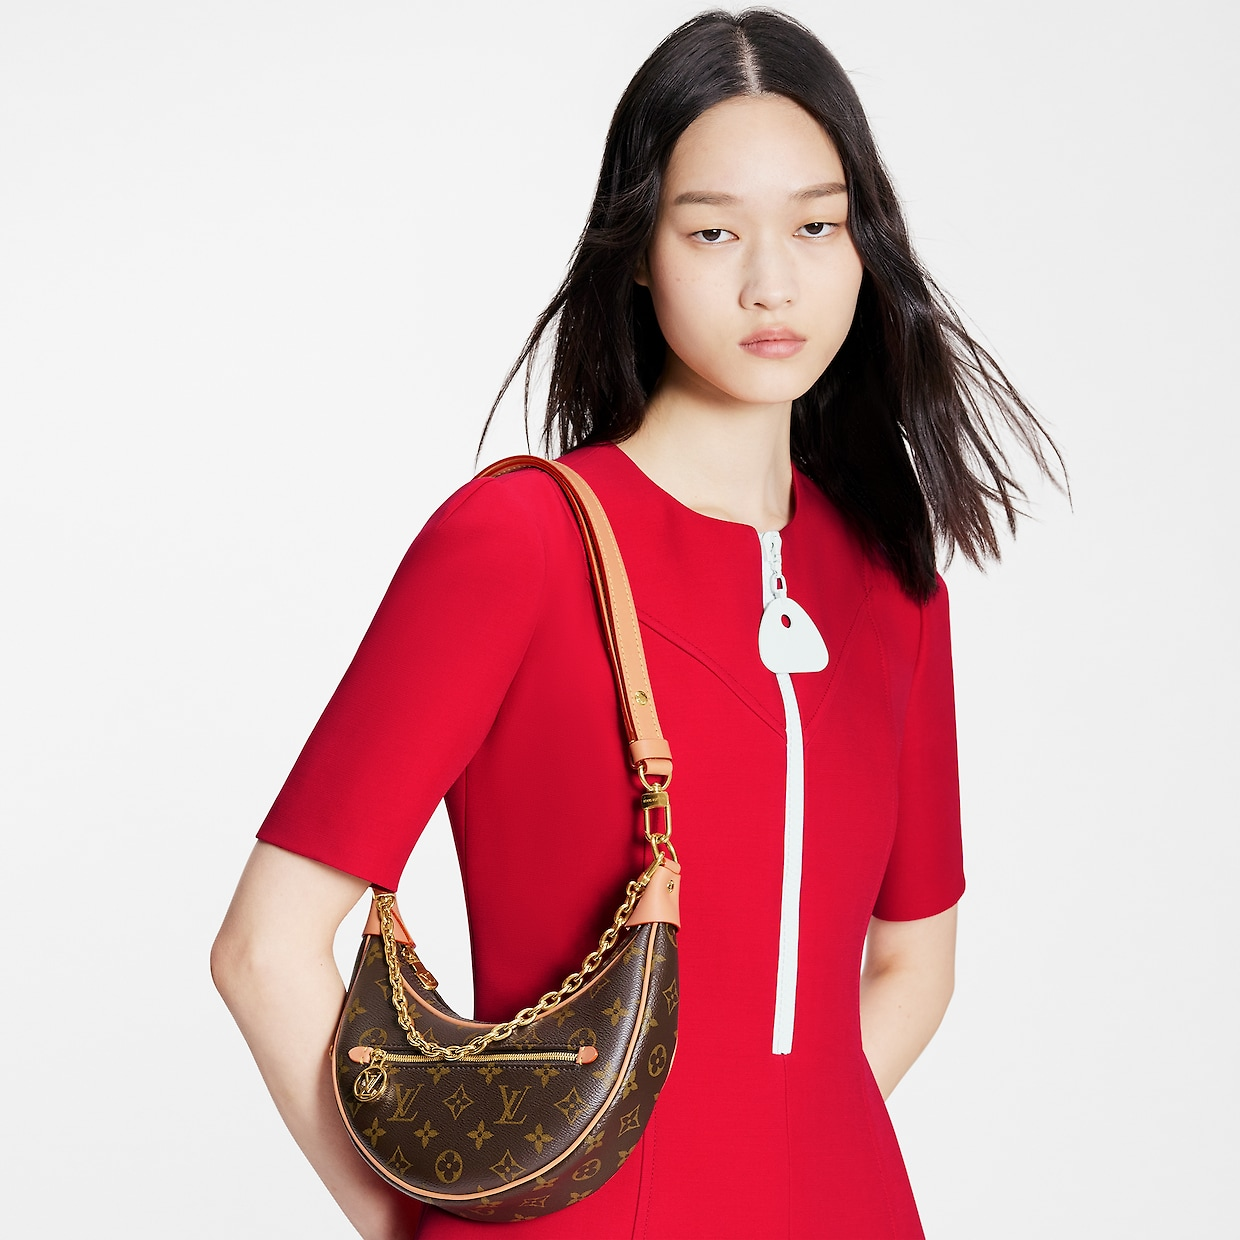 Read more about the article The Compact & Body-friendly Louis Vuitton Loop Bag!